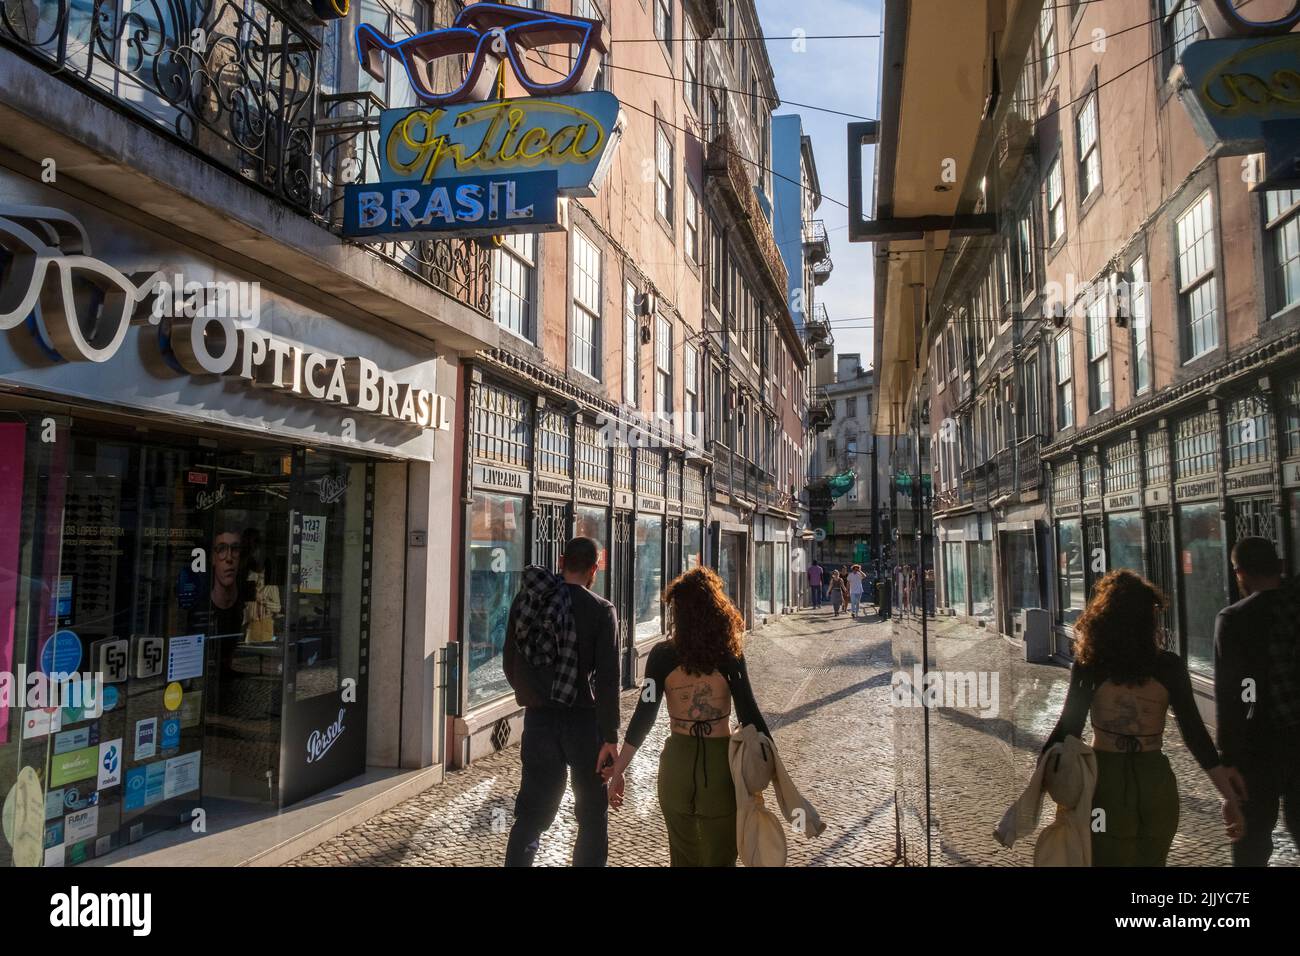 A couple walking, businesses reflected in a window, Lisbon, Portugal Stock Photo